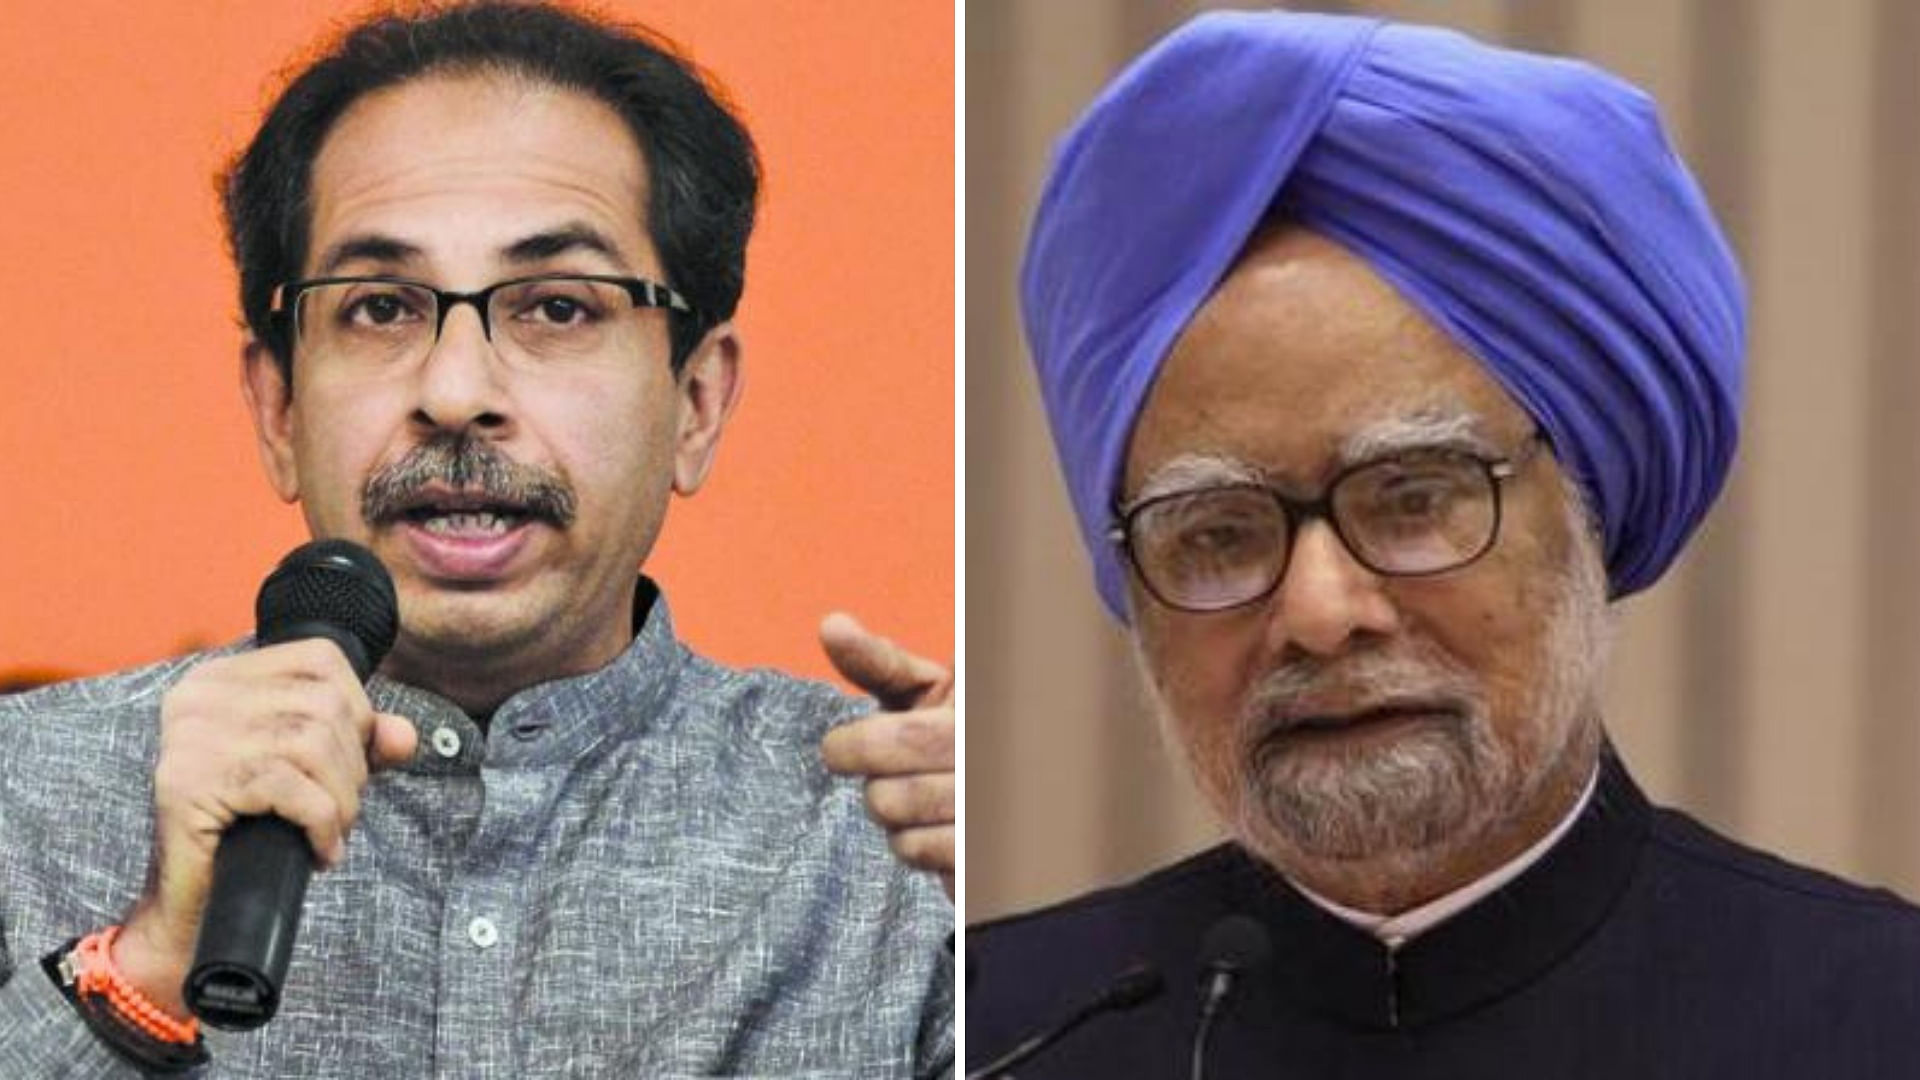 Shiv Sena said that listening to former PM Manmohan Singh is in national interest right now.